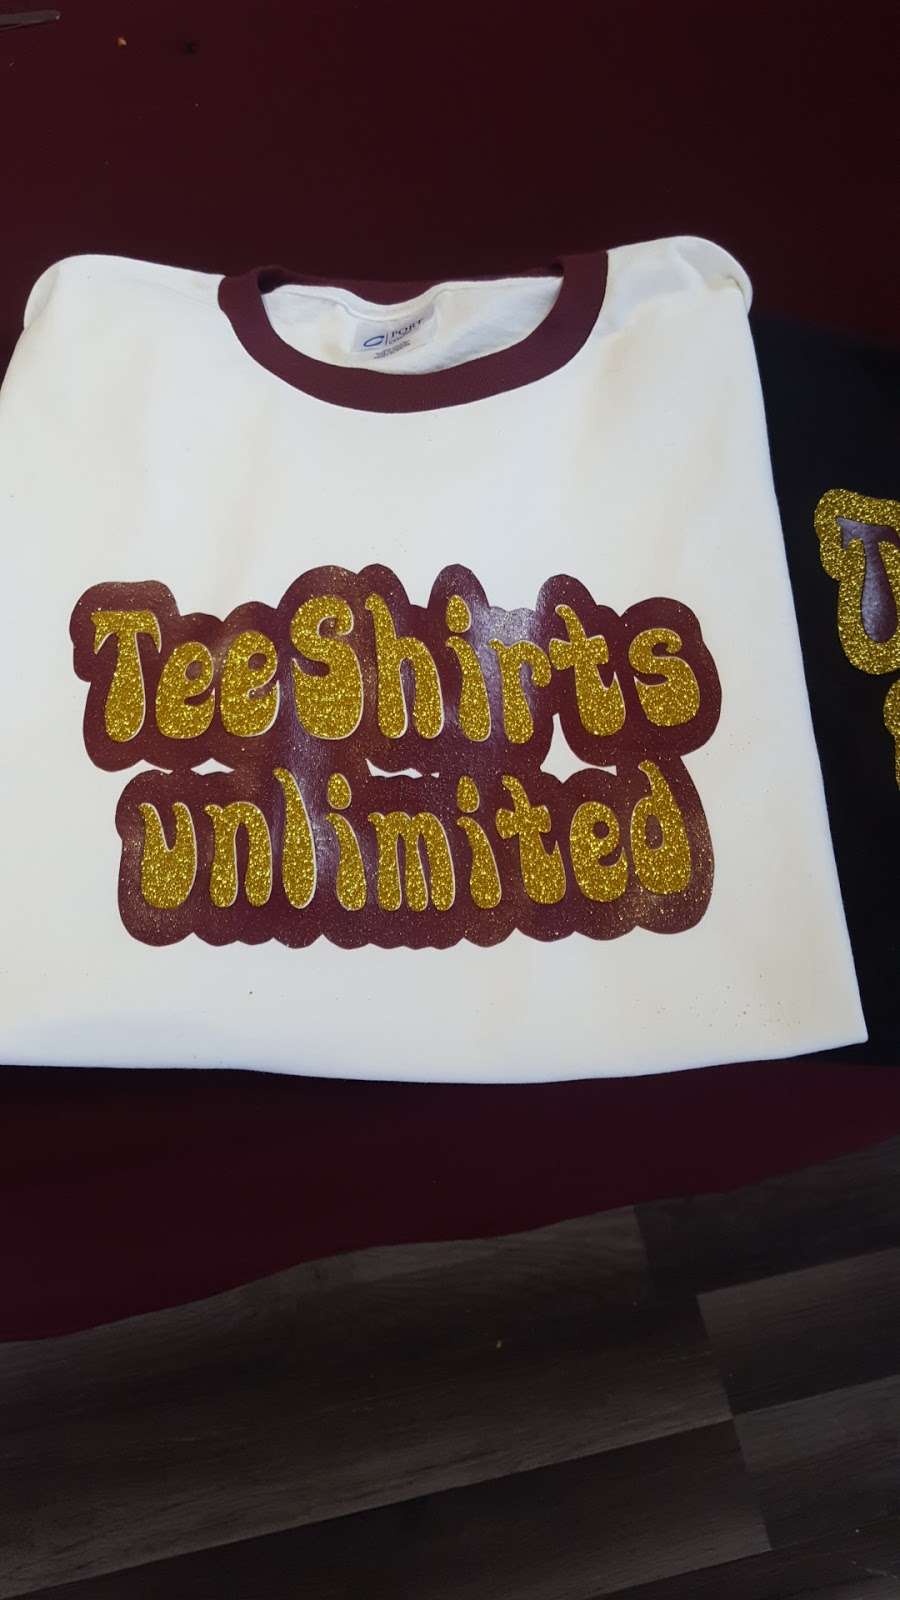 La Cee Promotions Screen Printing | 143 Linwood Ave, Paterson, NJ 07502 | Phone: (973) 356-6822